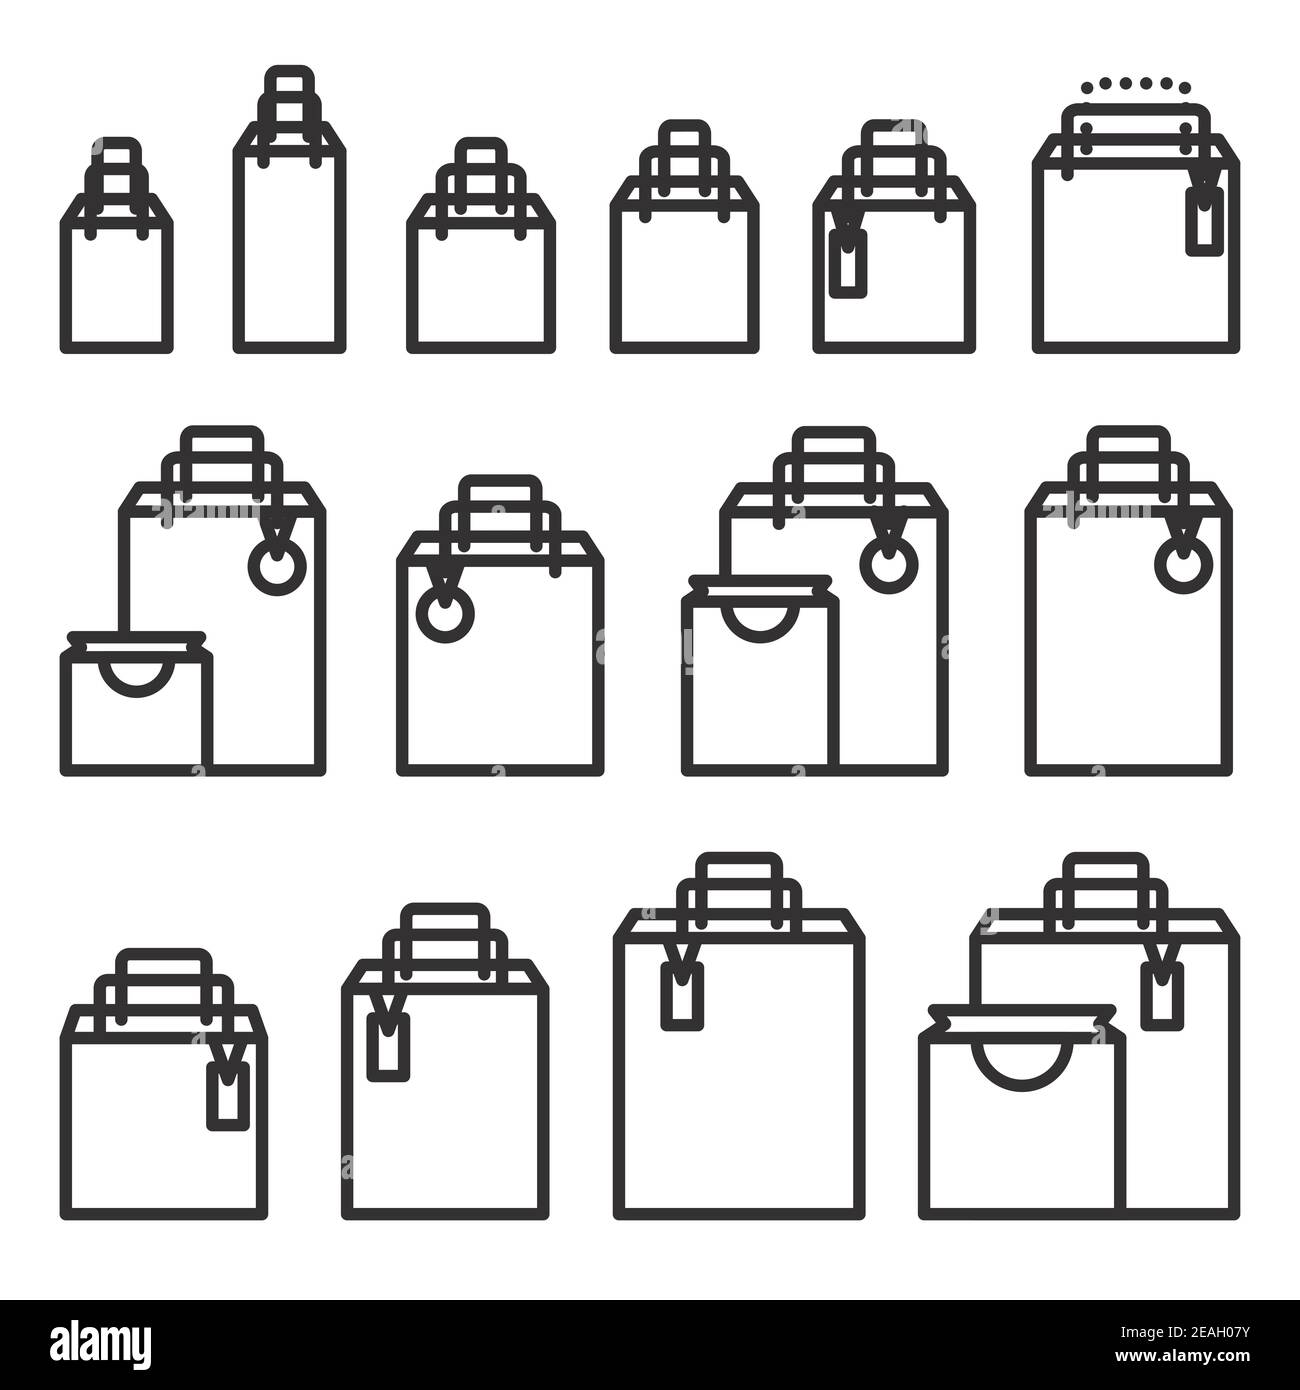 Outline Shopping Bag Icon Set. Vector Illustration. Paper Market Bag  Icons Isolated on White. Stock Vector